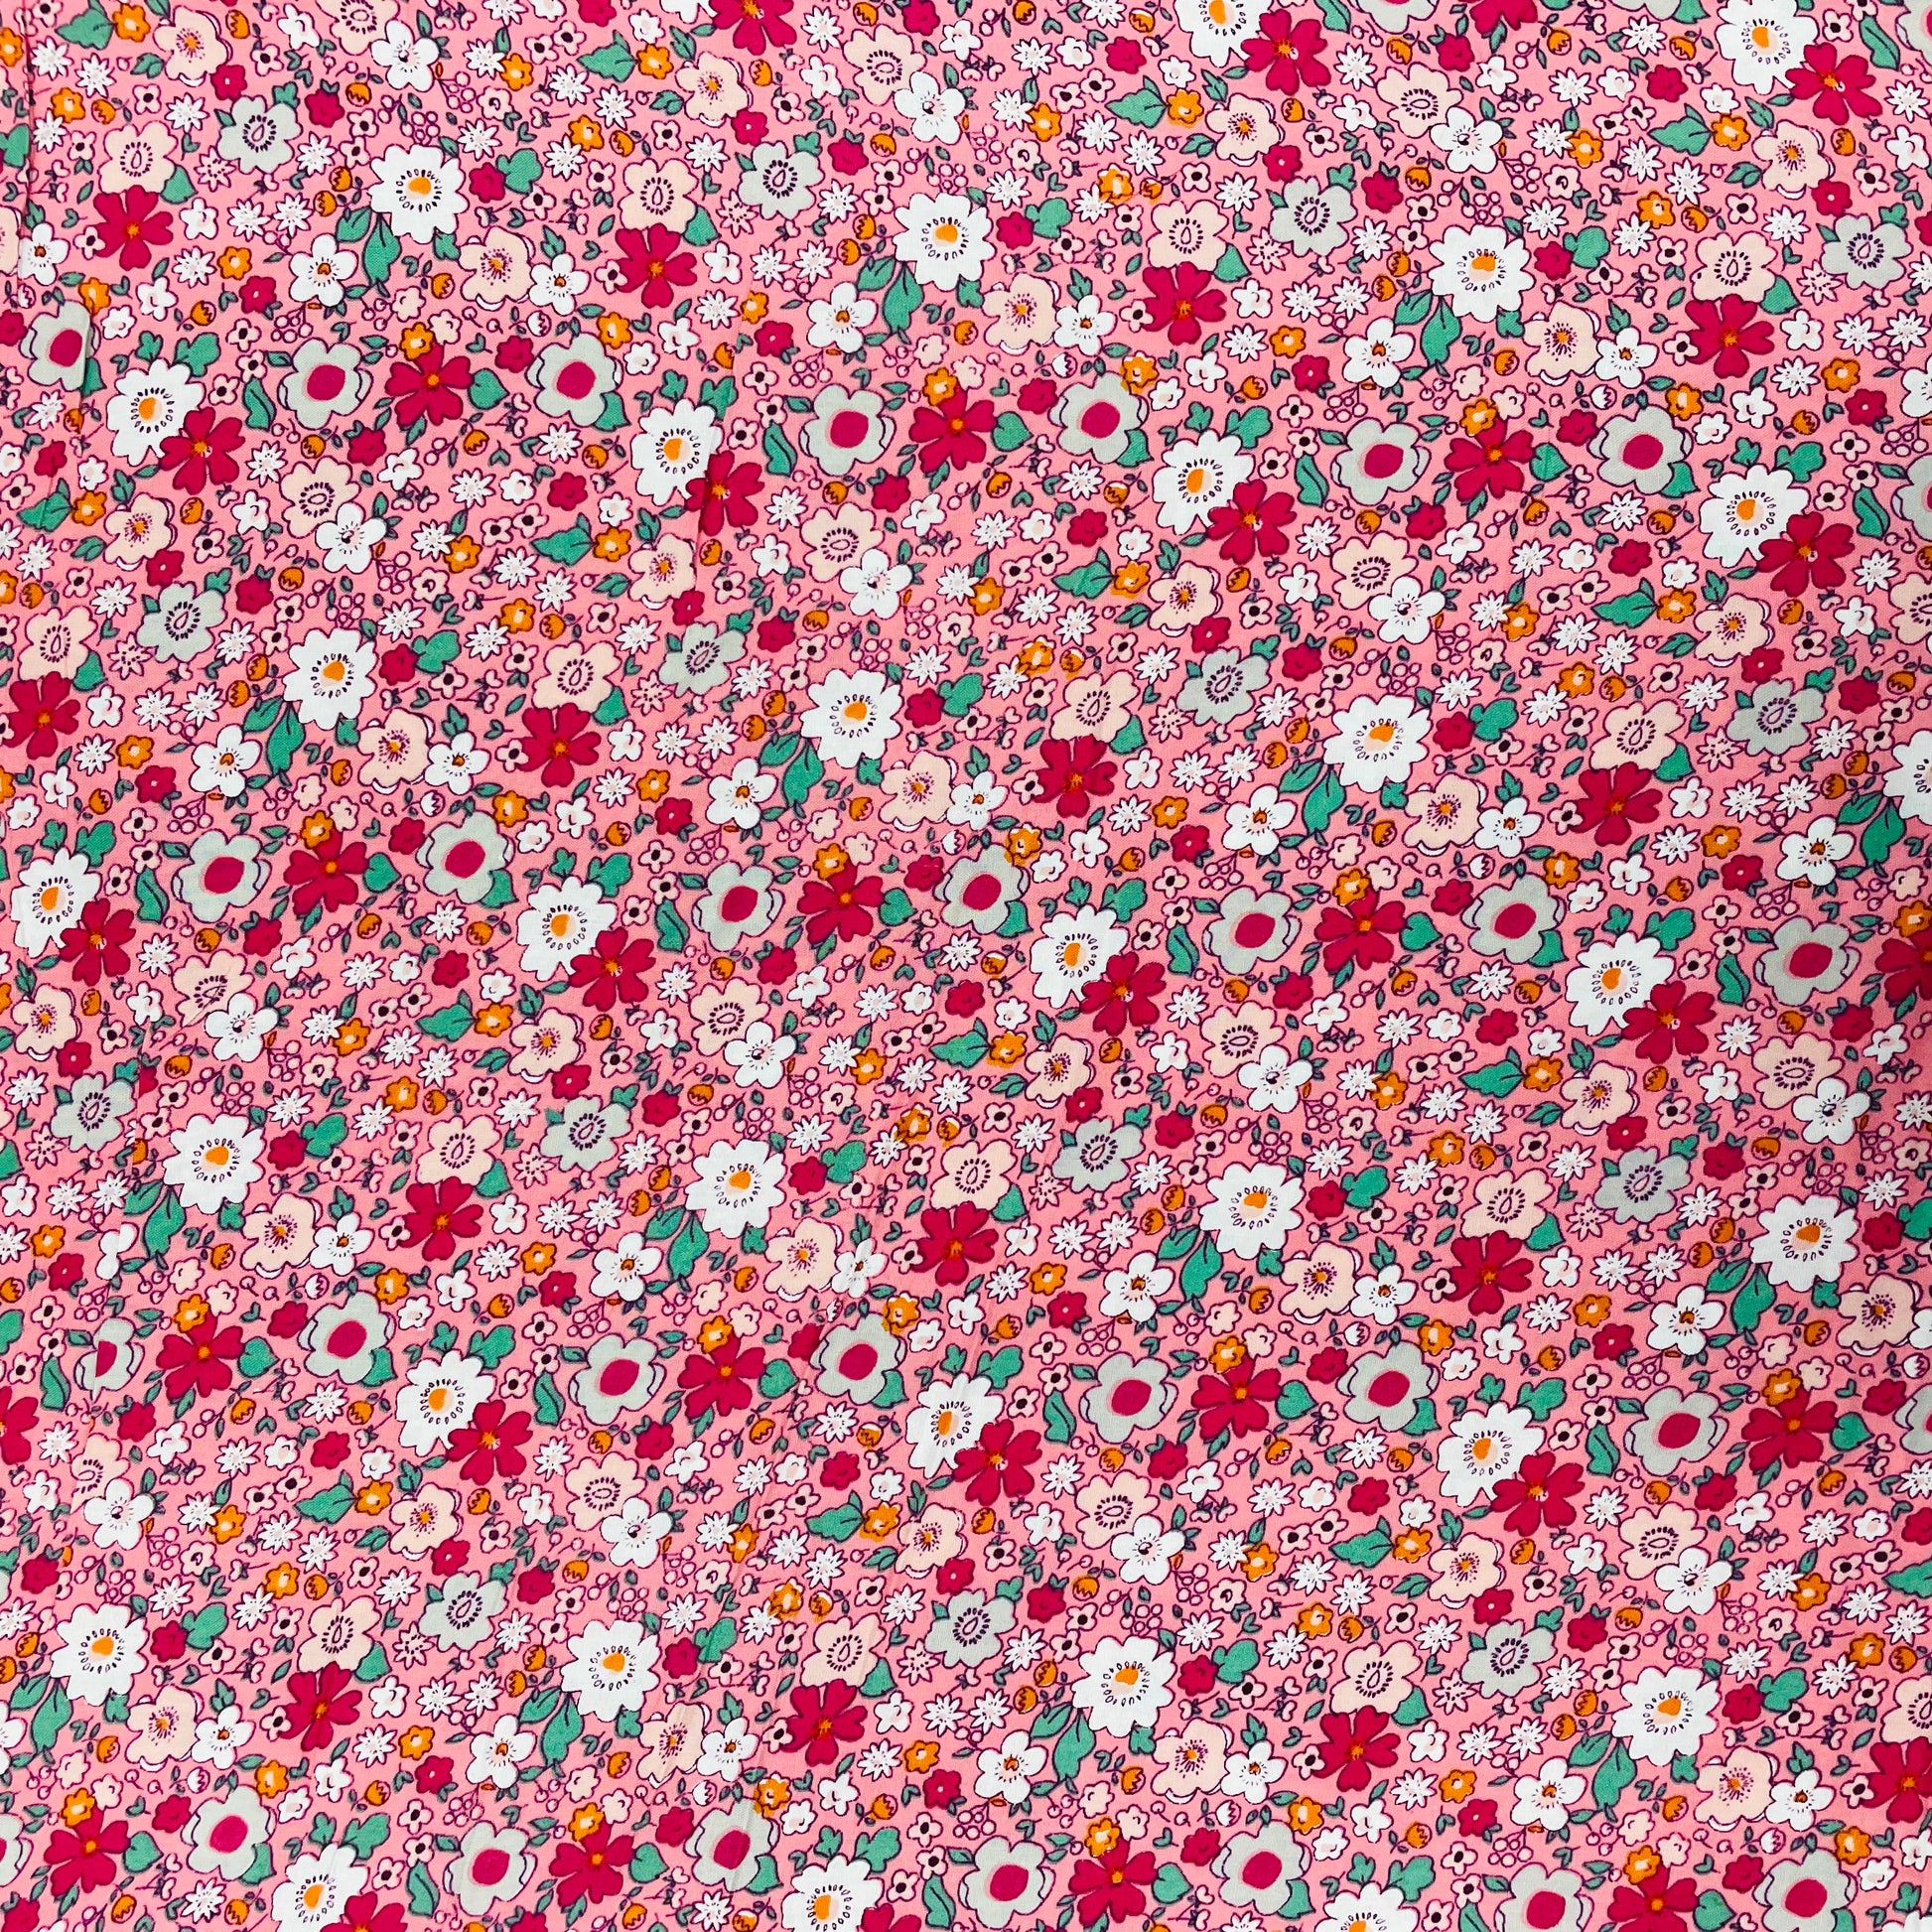 Pink With Multicolor Floral Print Rayon Fabric - TradeUNO